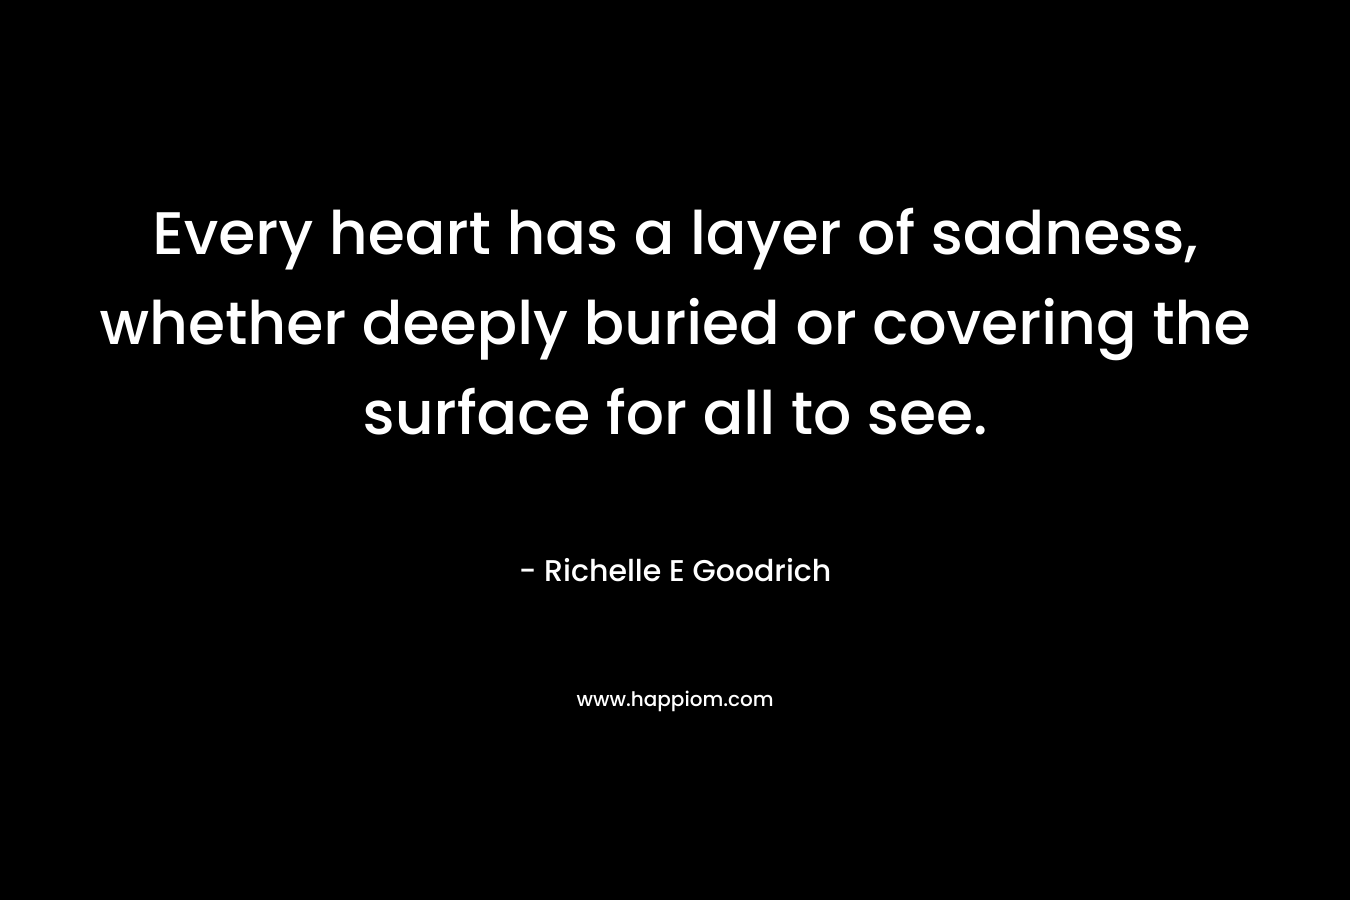 Every heart has a layer of sadness, whether deeply buried or covering the surface for all to see.